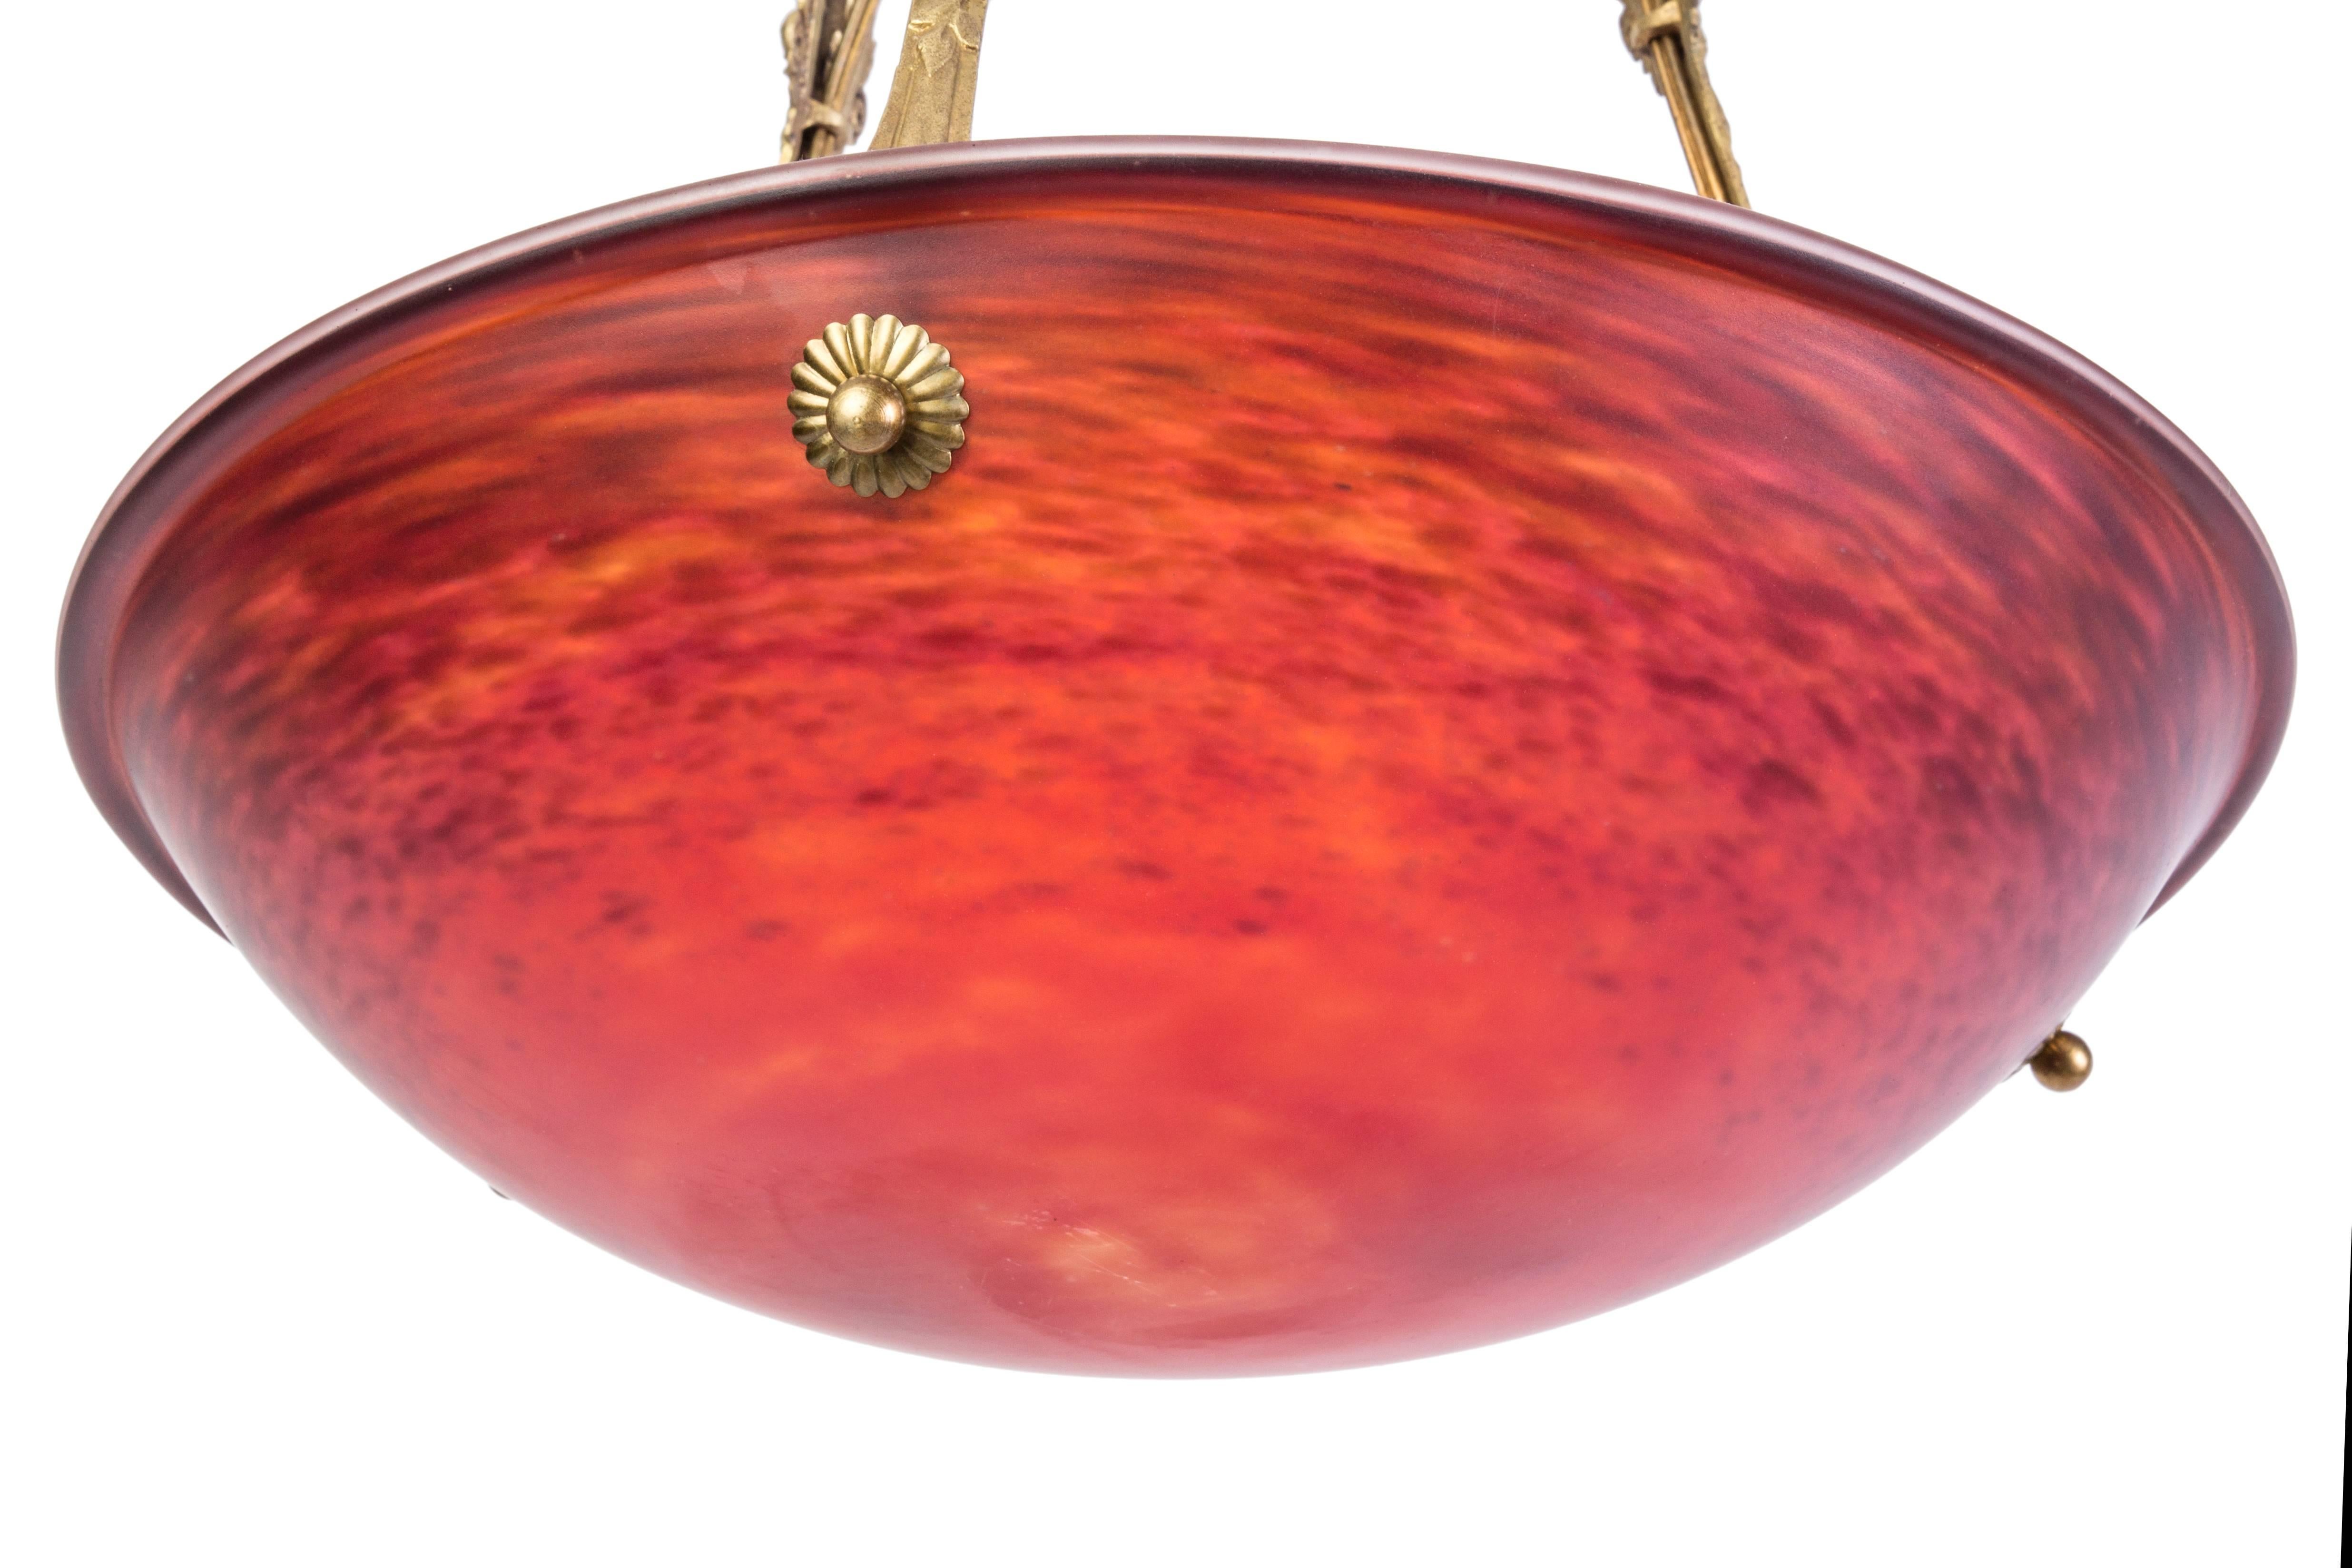 This exceptional 1920s French Art Deco chandelier features a beautiful crimson and sunflower colored glass shade, connected to an etched floral hand-wrought iron bronze frame. 

Made in France, circa 1920.